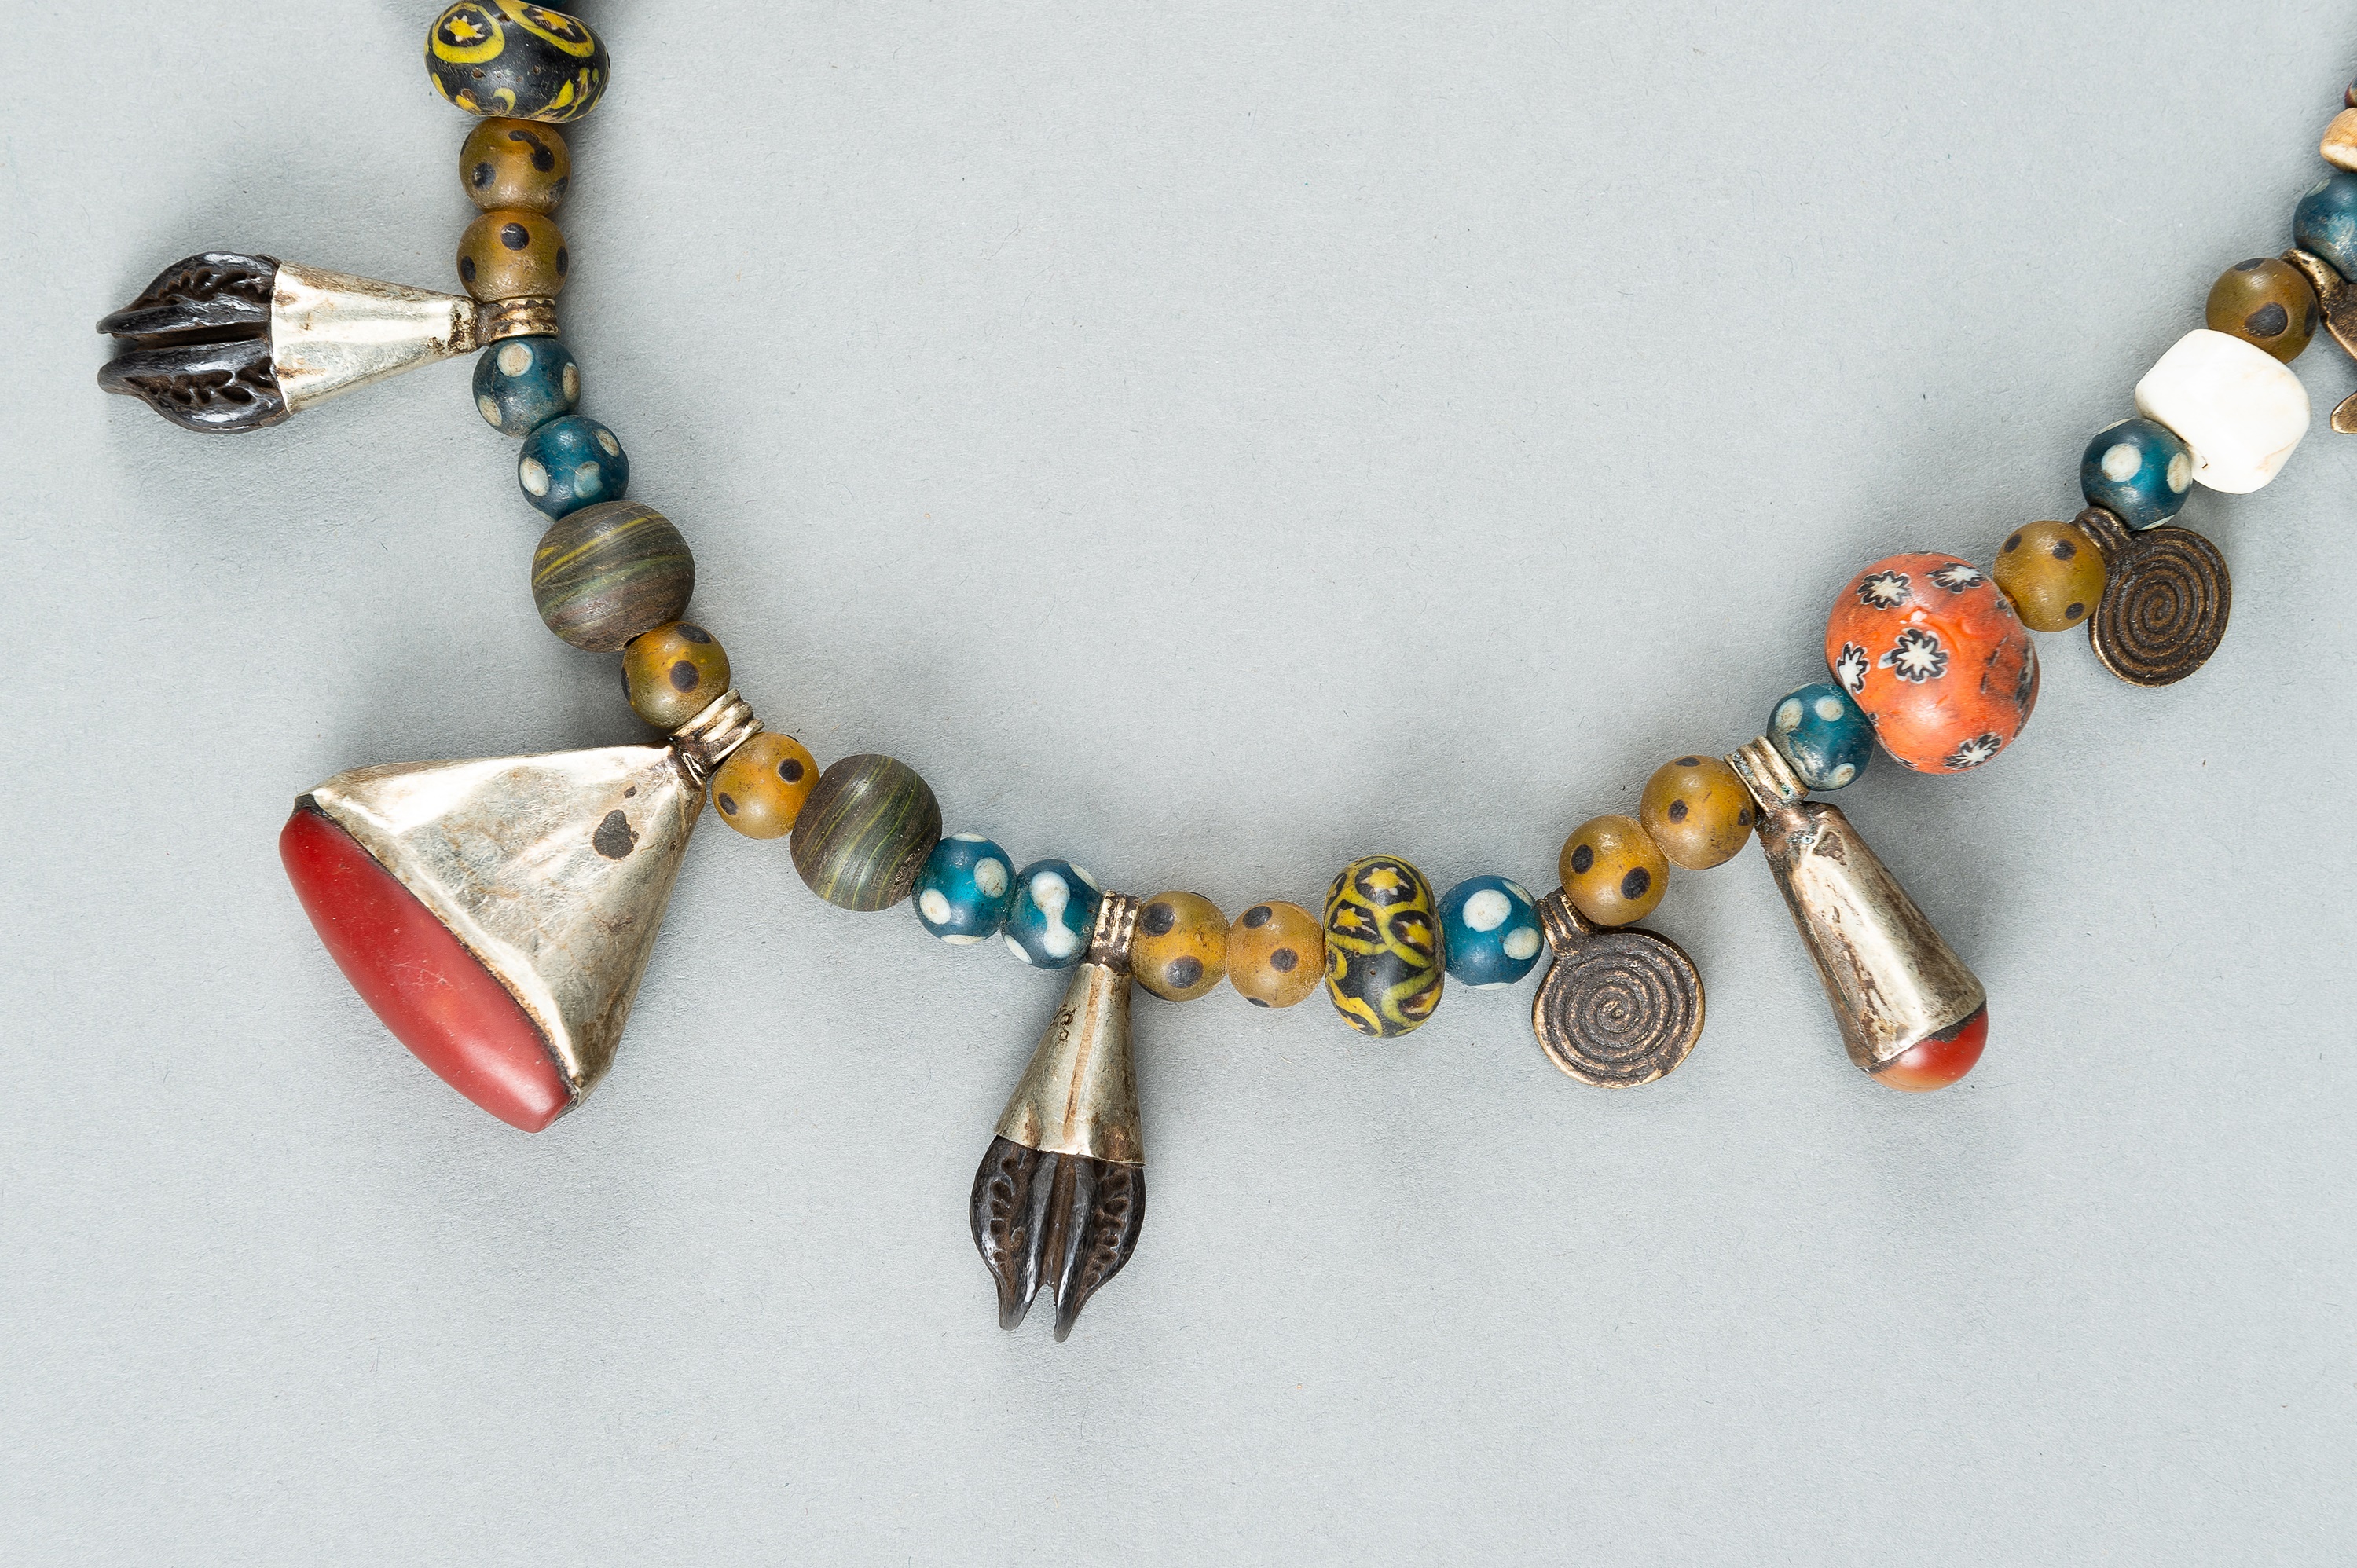 A NAGALAND MULTI-COLORED GLASS, BRASS AND SHELL NECKLACE, c. 1900s - Image 12 of 17